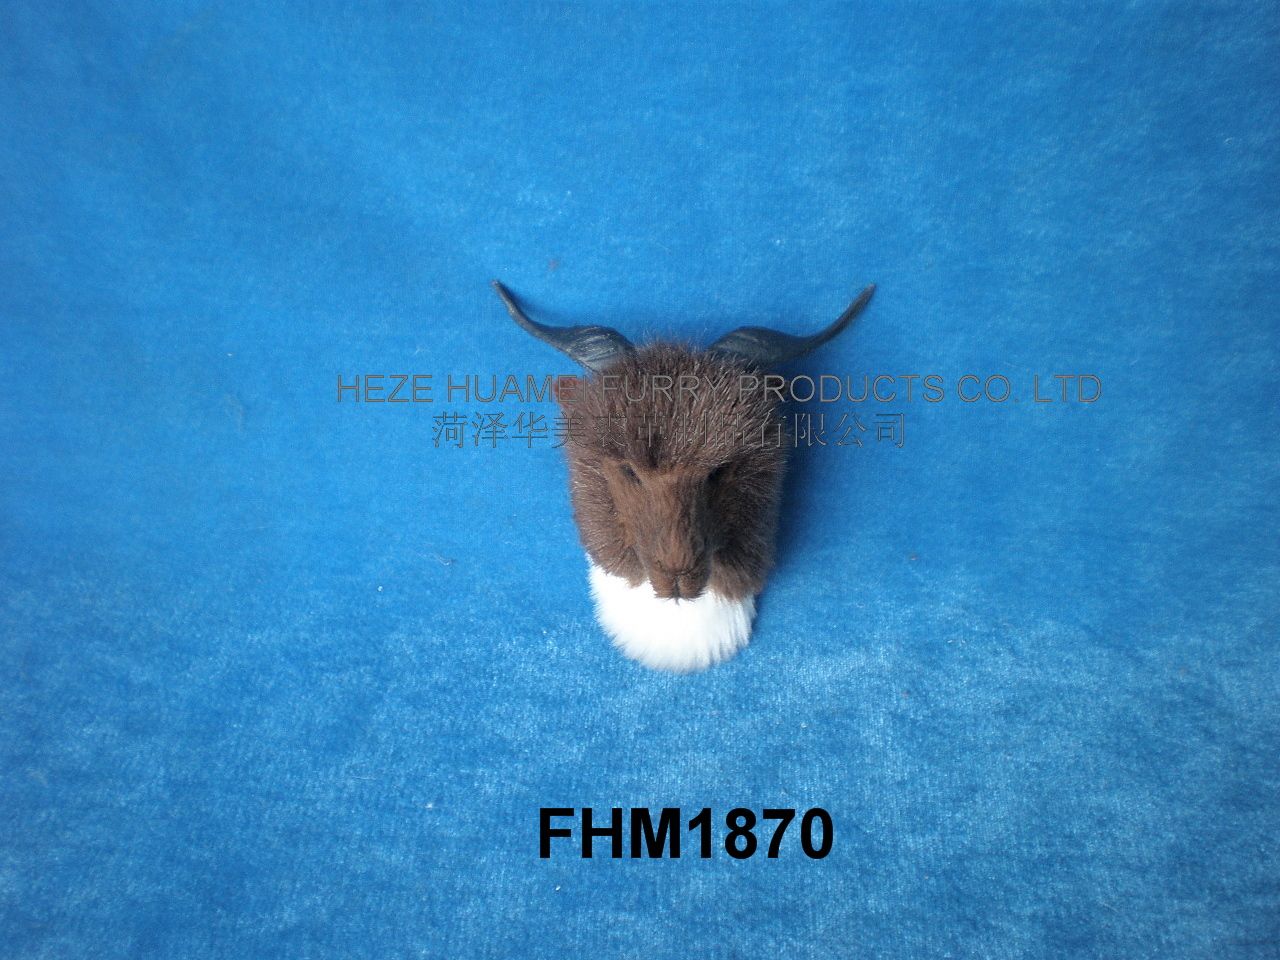 FHM1870,HEZE YUHANG FURRY PRODUCTS CO., LTD.